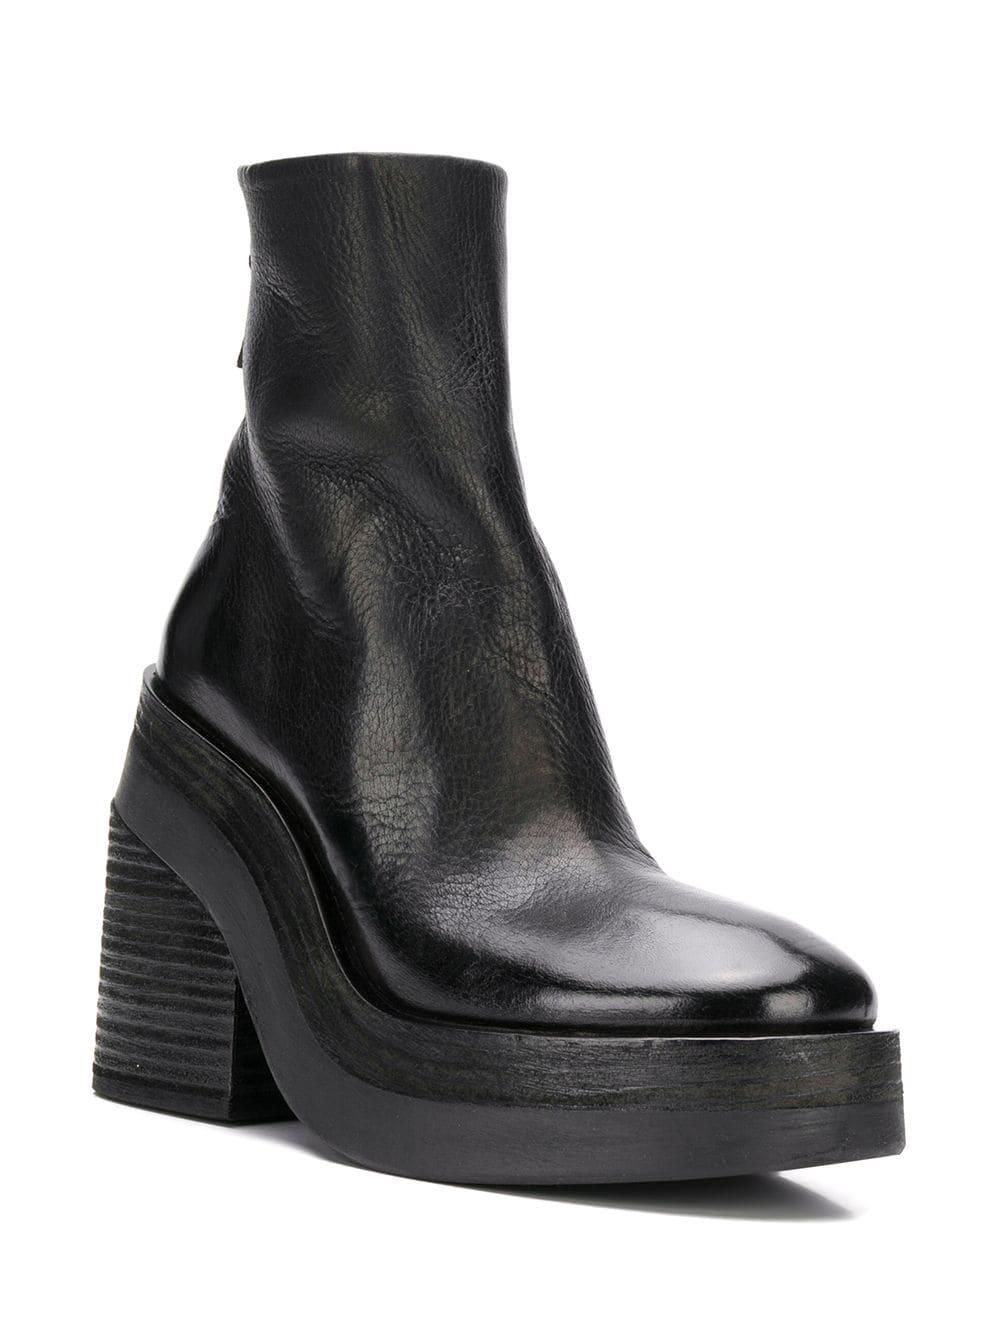 Marsèll Leather Platform Ankle Boots in 